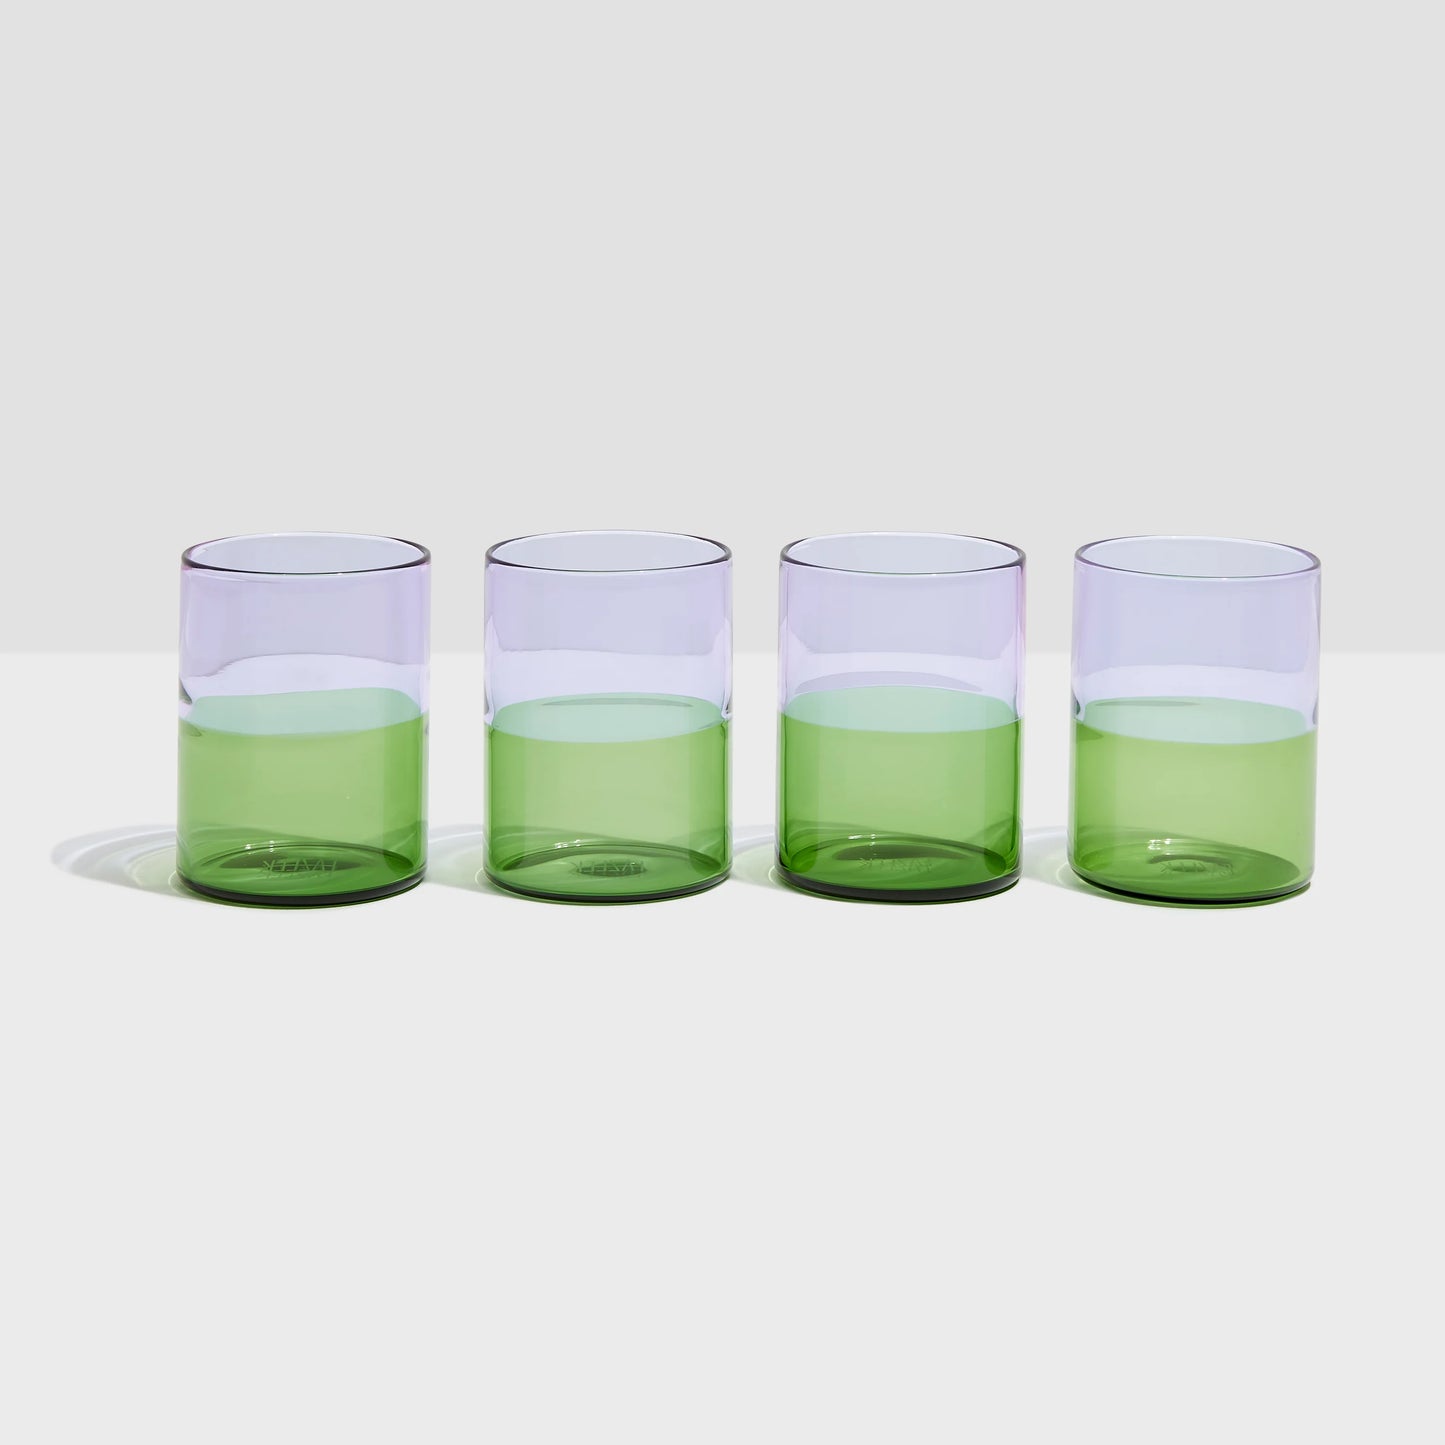 Two Tone Glasses in Lilac & Green (Set of 4)